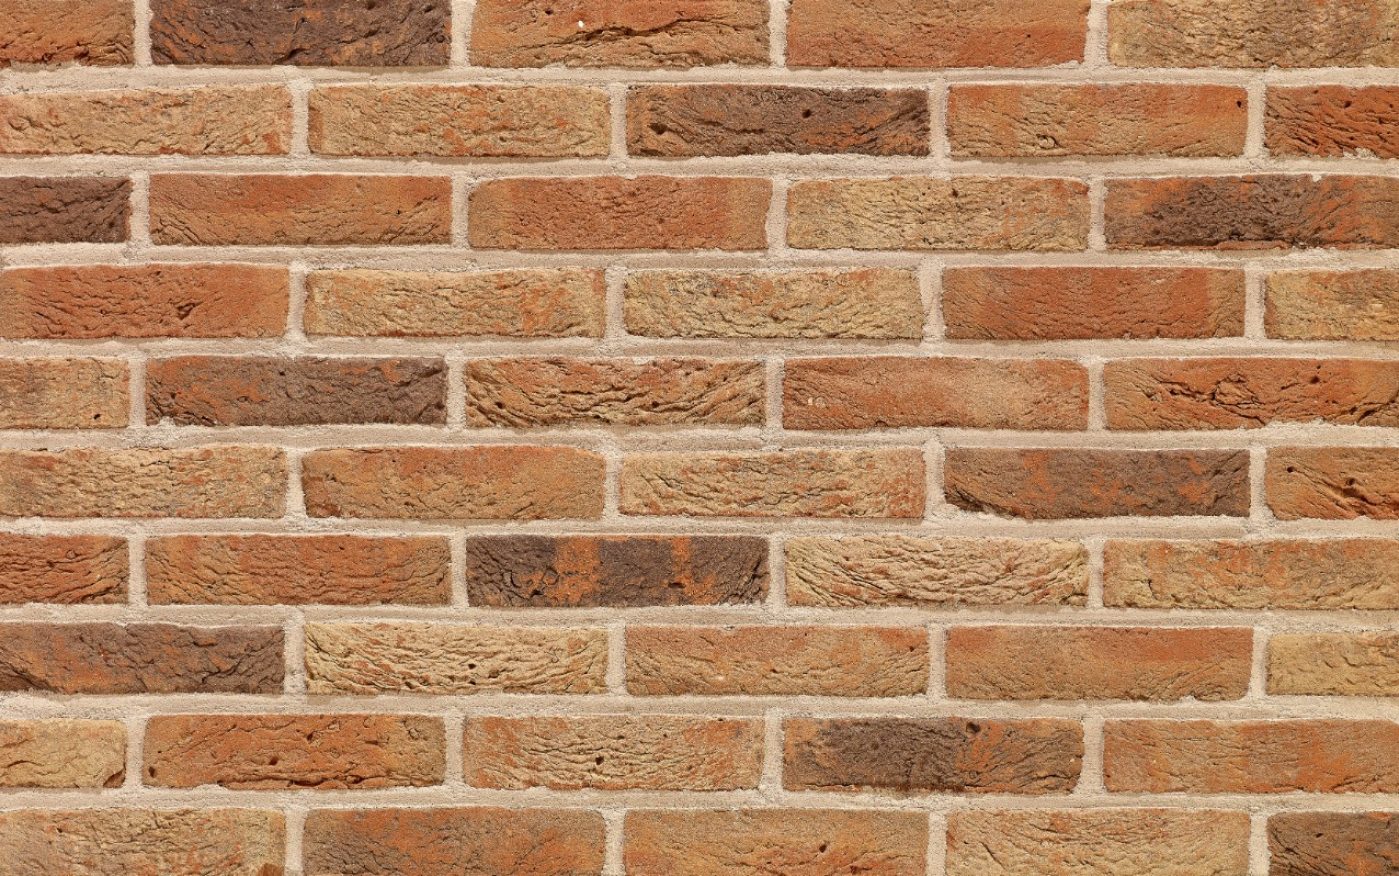 How to Choose the Right Brick & Mortar Colour | Wienerberger